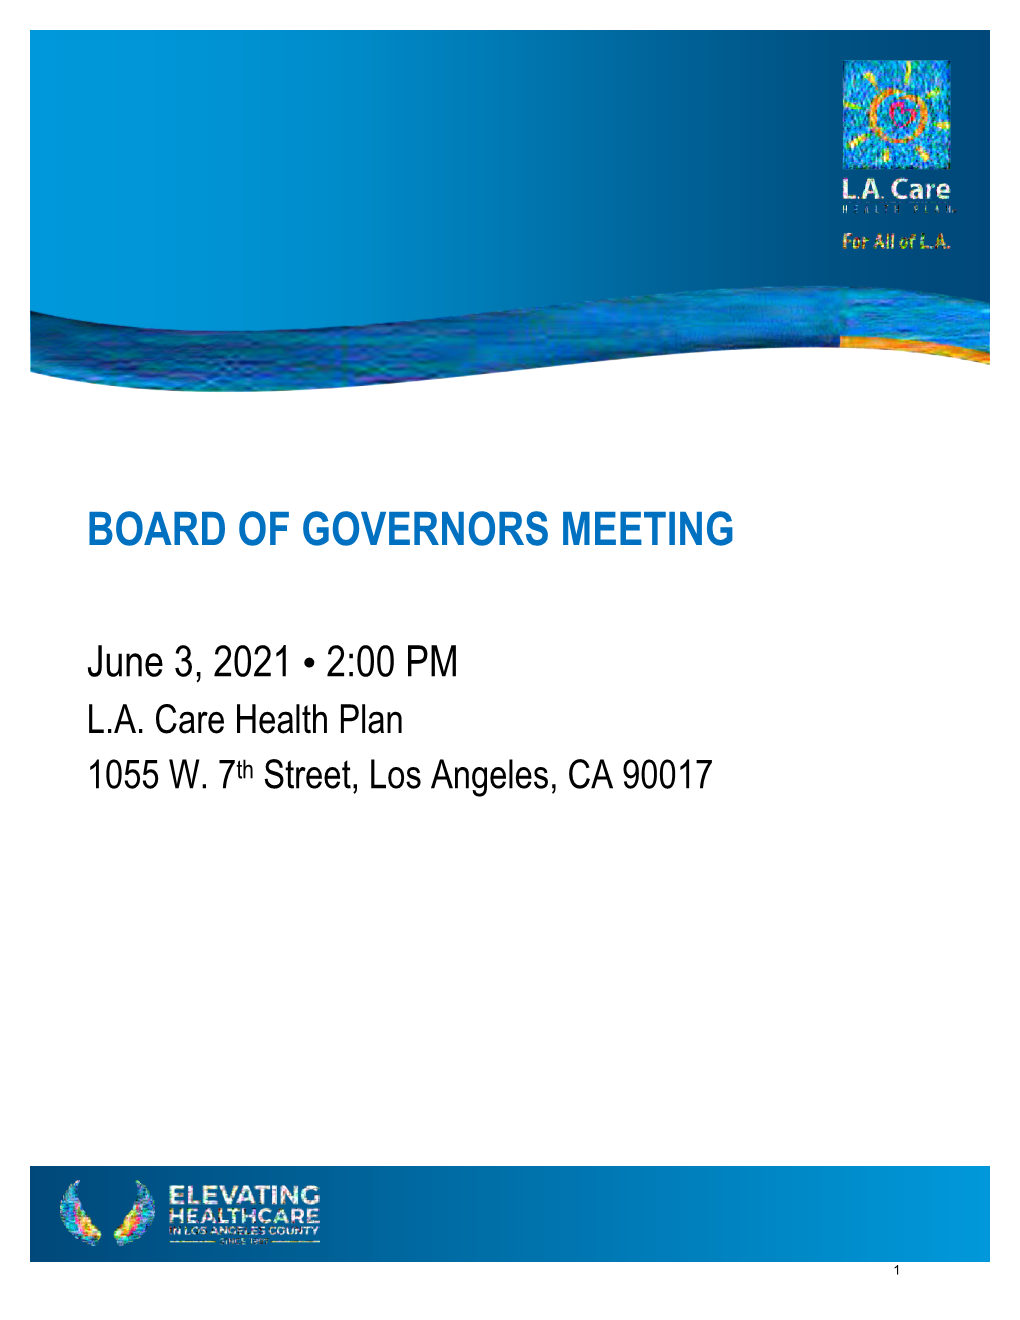 Board of Governors Meeting